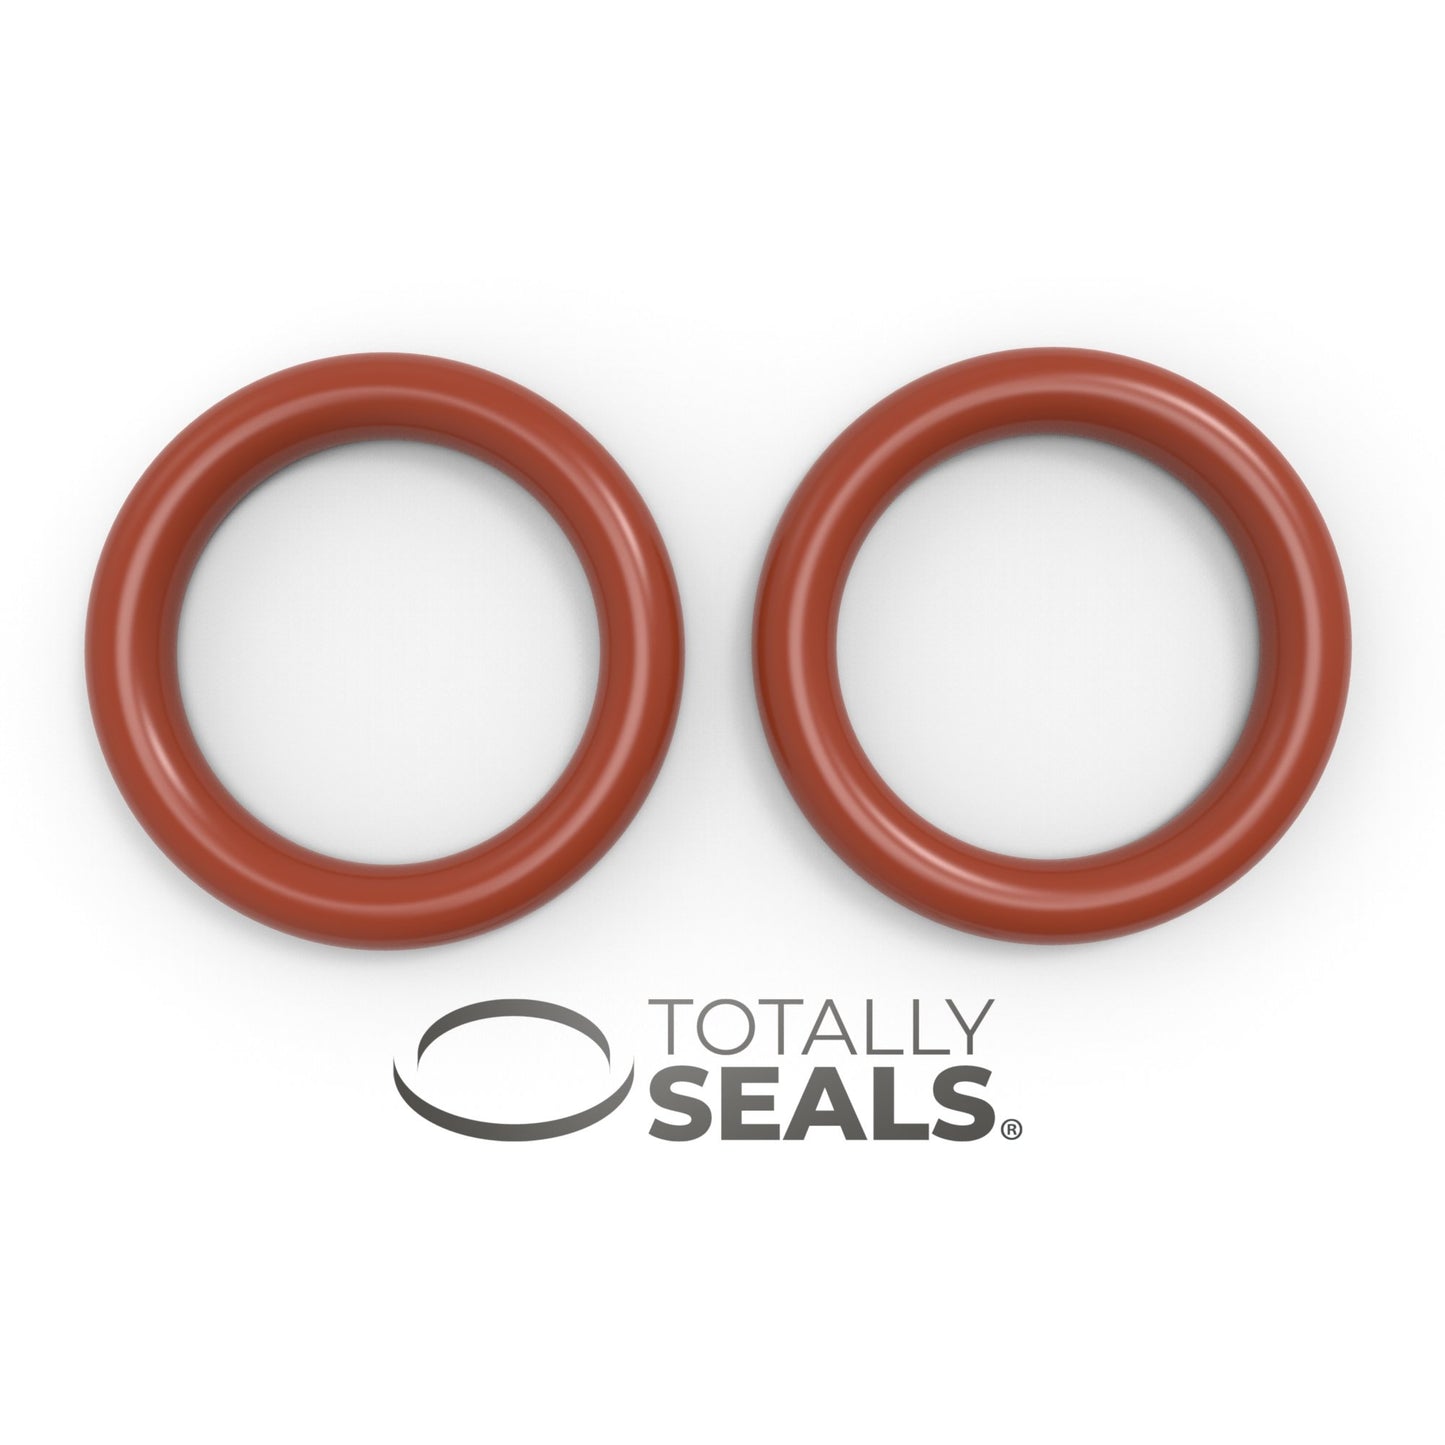 23mm x 3mm (29mm OD) Silicone O-Rings - Totally Seals®